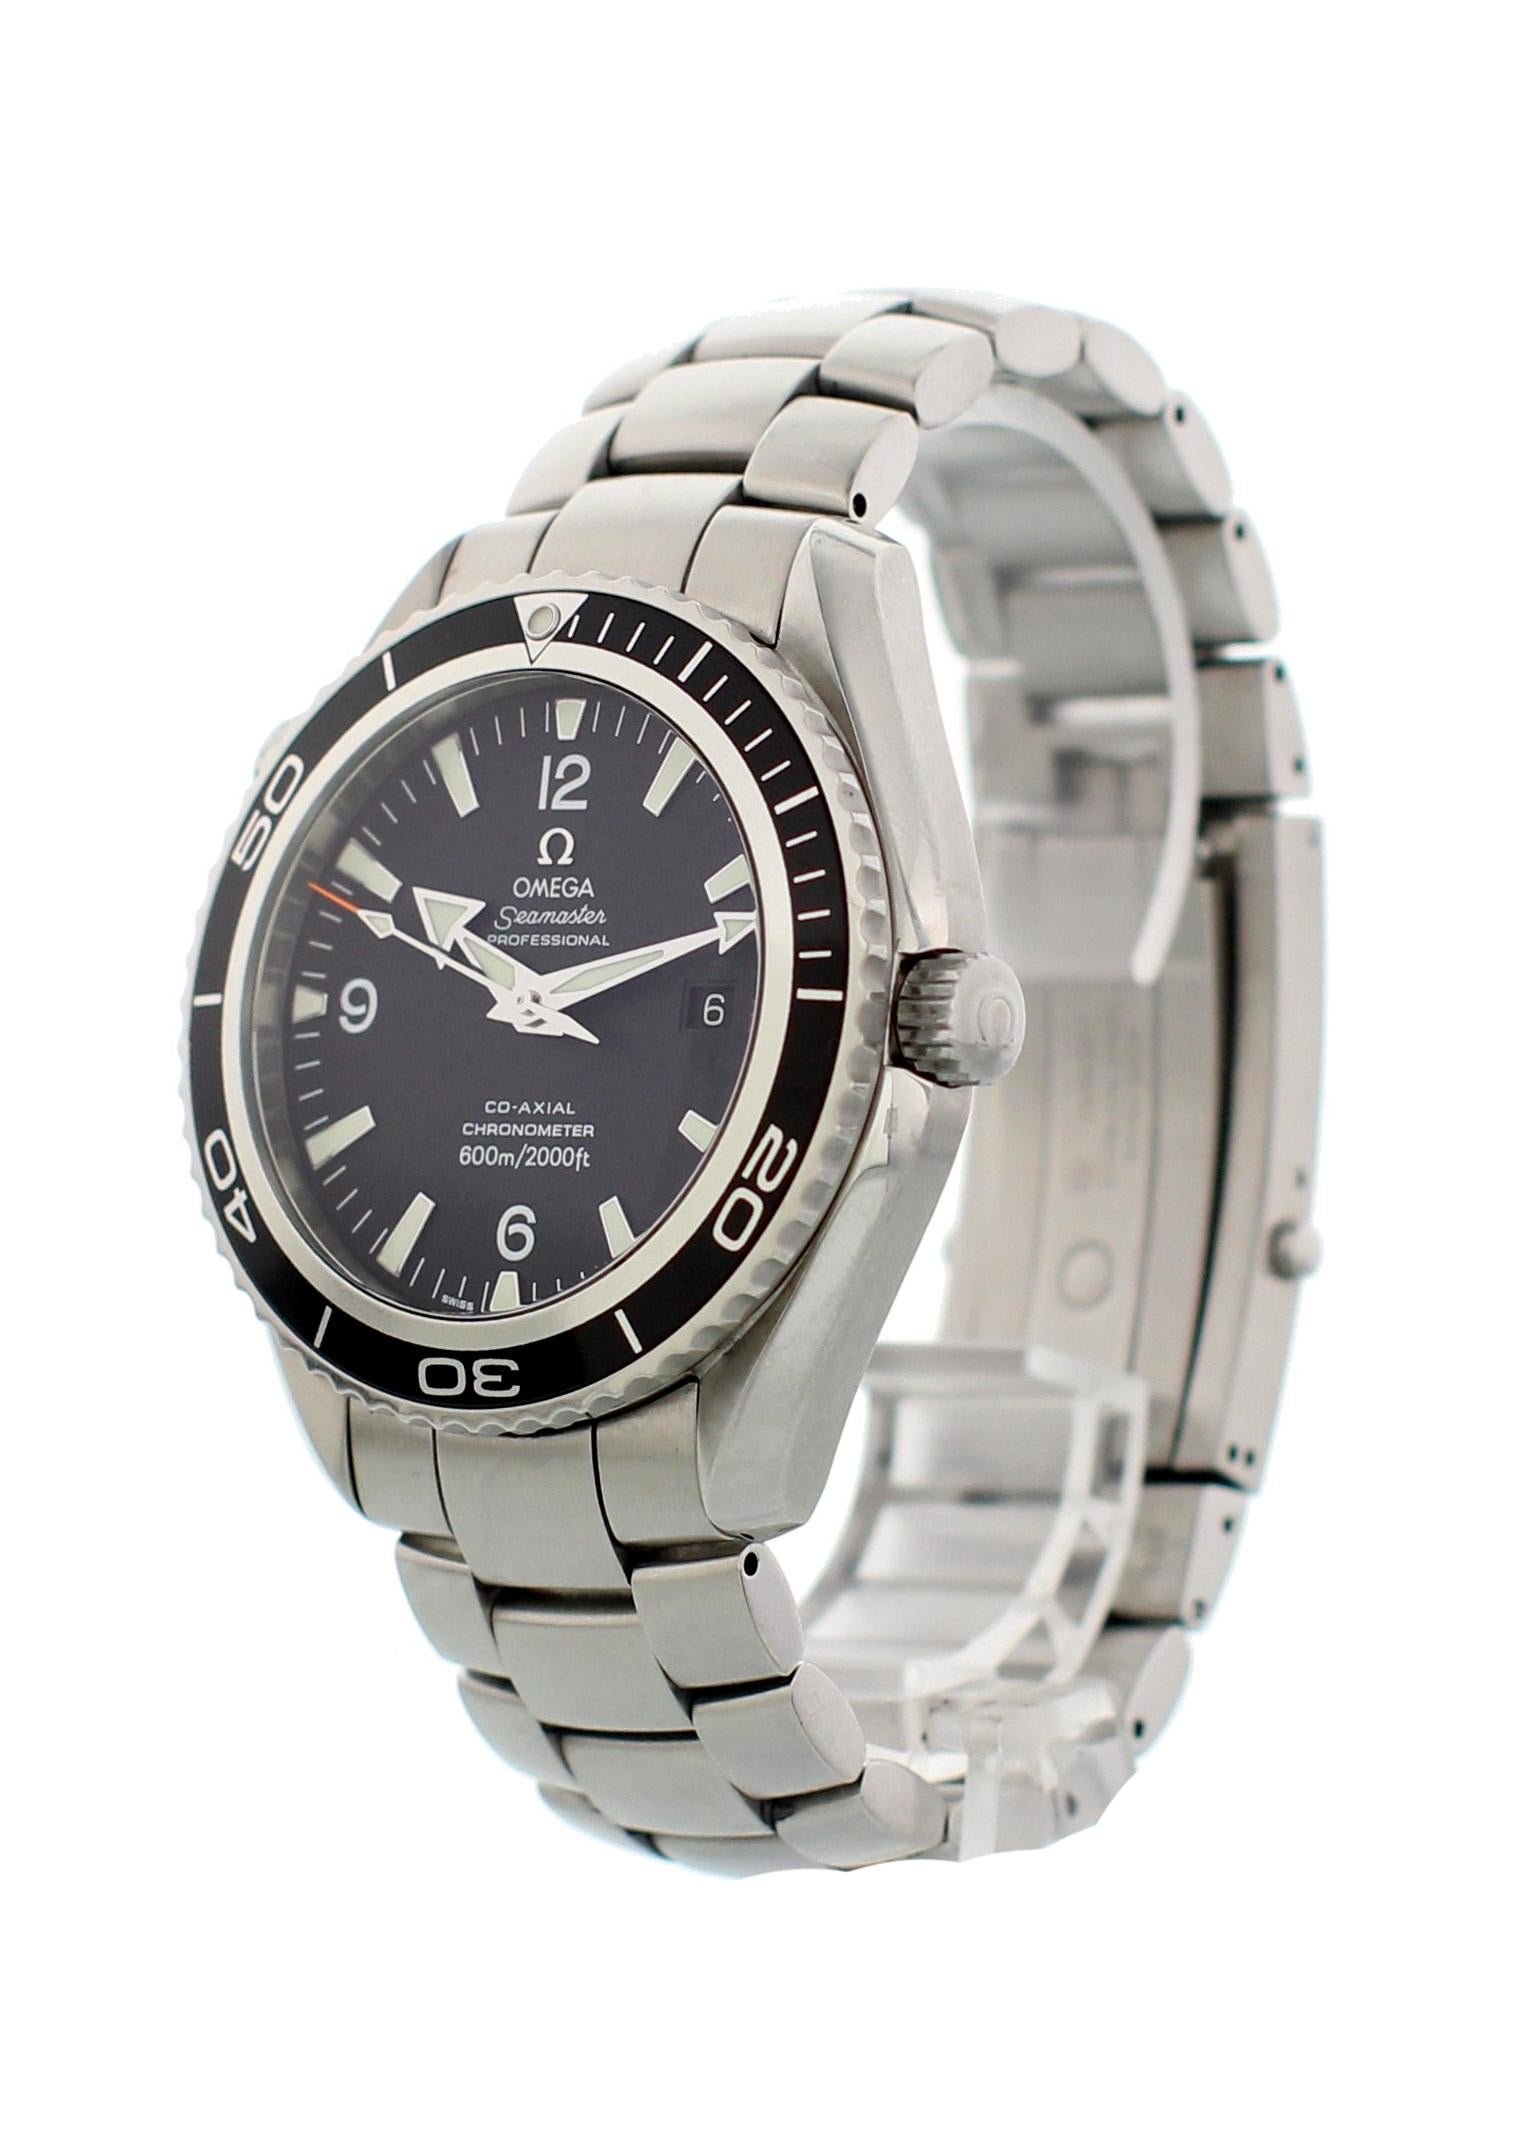 Omega Seamaster Professional Planet Ocean 2200.51.00 45mm case. Stainless steel unidirectional rotating bezel. Black dial with date display and luminous hands and markers. Stainless steel band with a double push button fold over clasp. Calibre 5700